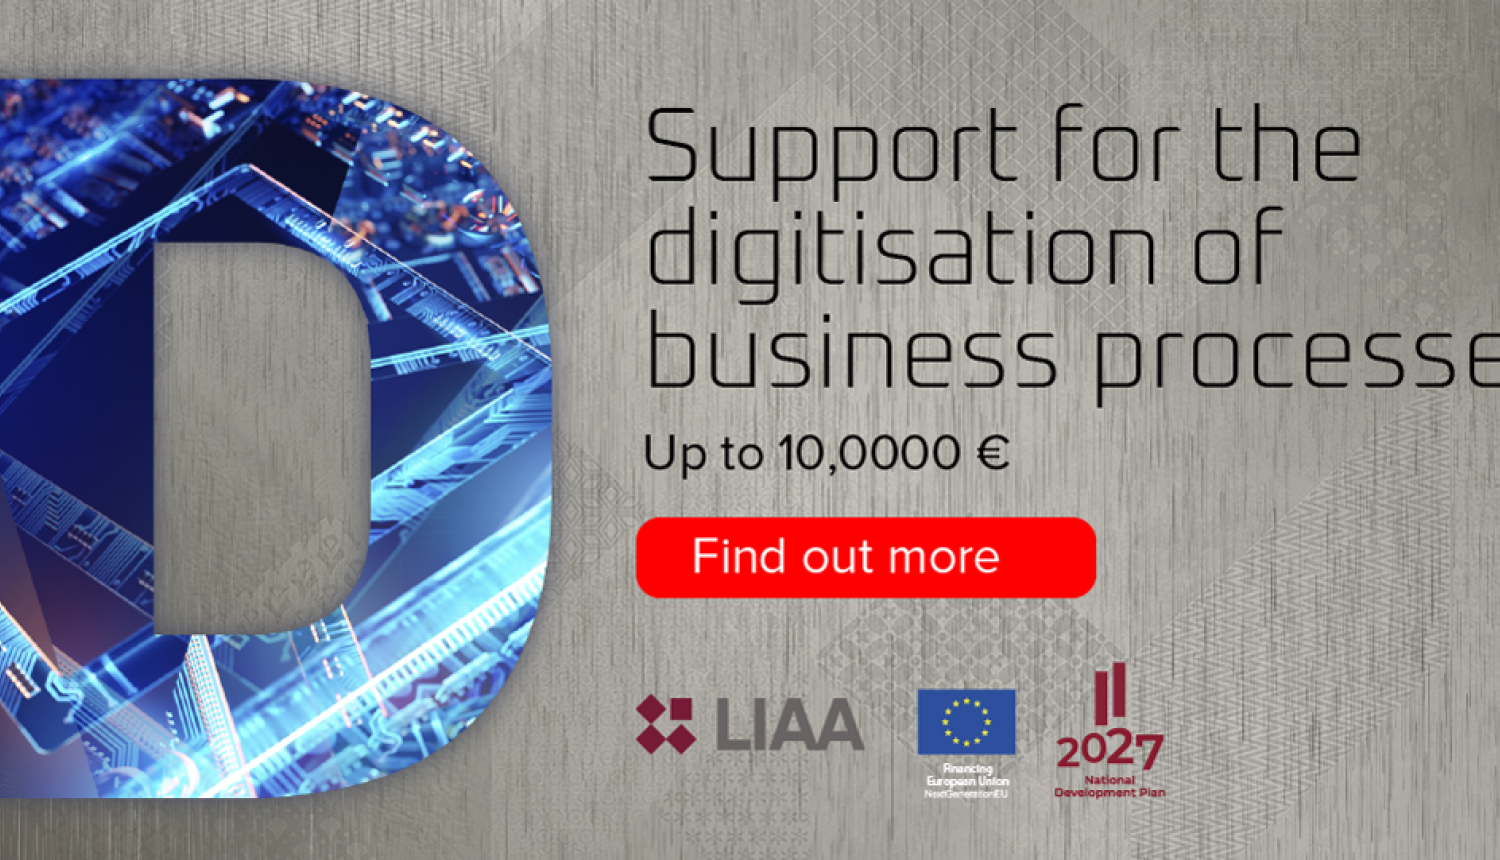 The Investment and Development Agency of Latvia (LIAA) has started accepting projects for its new digitisation program